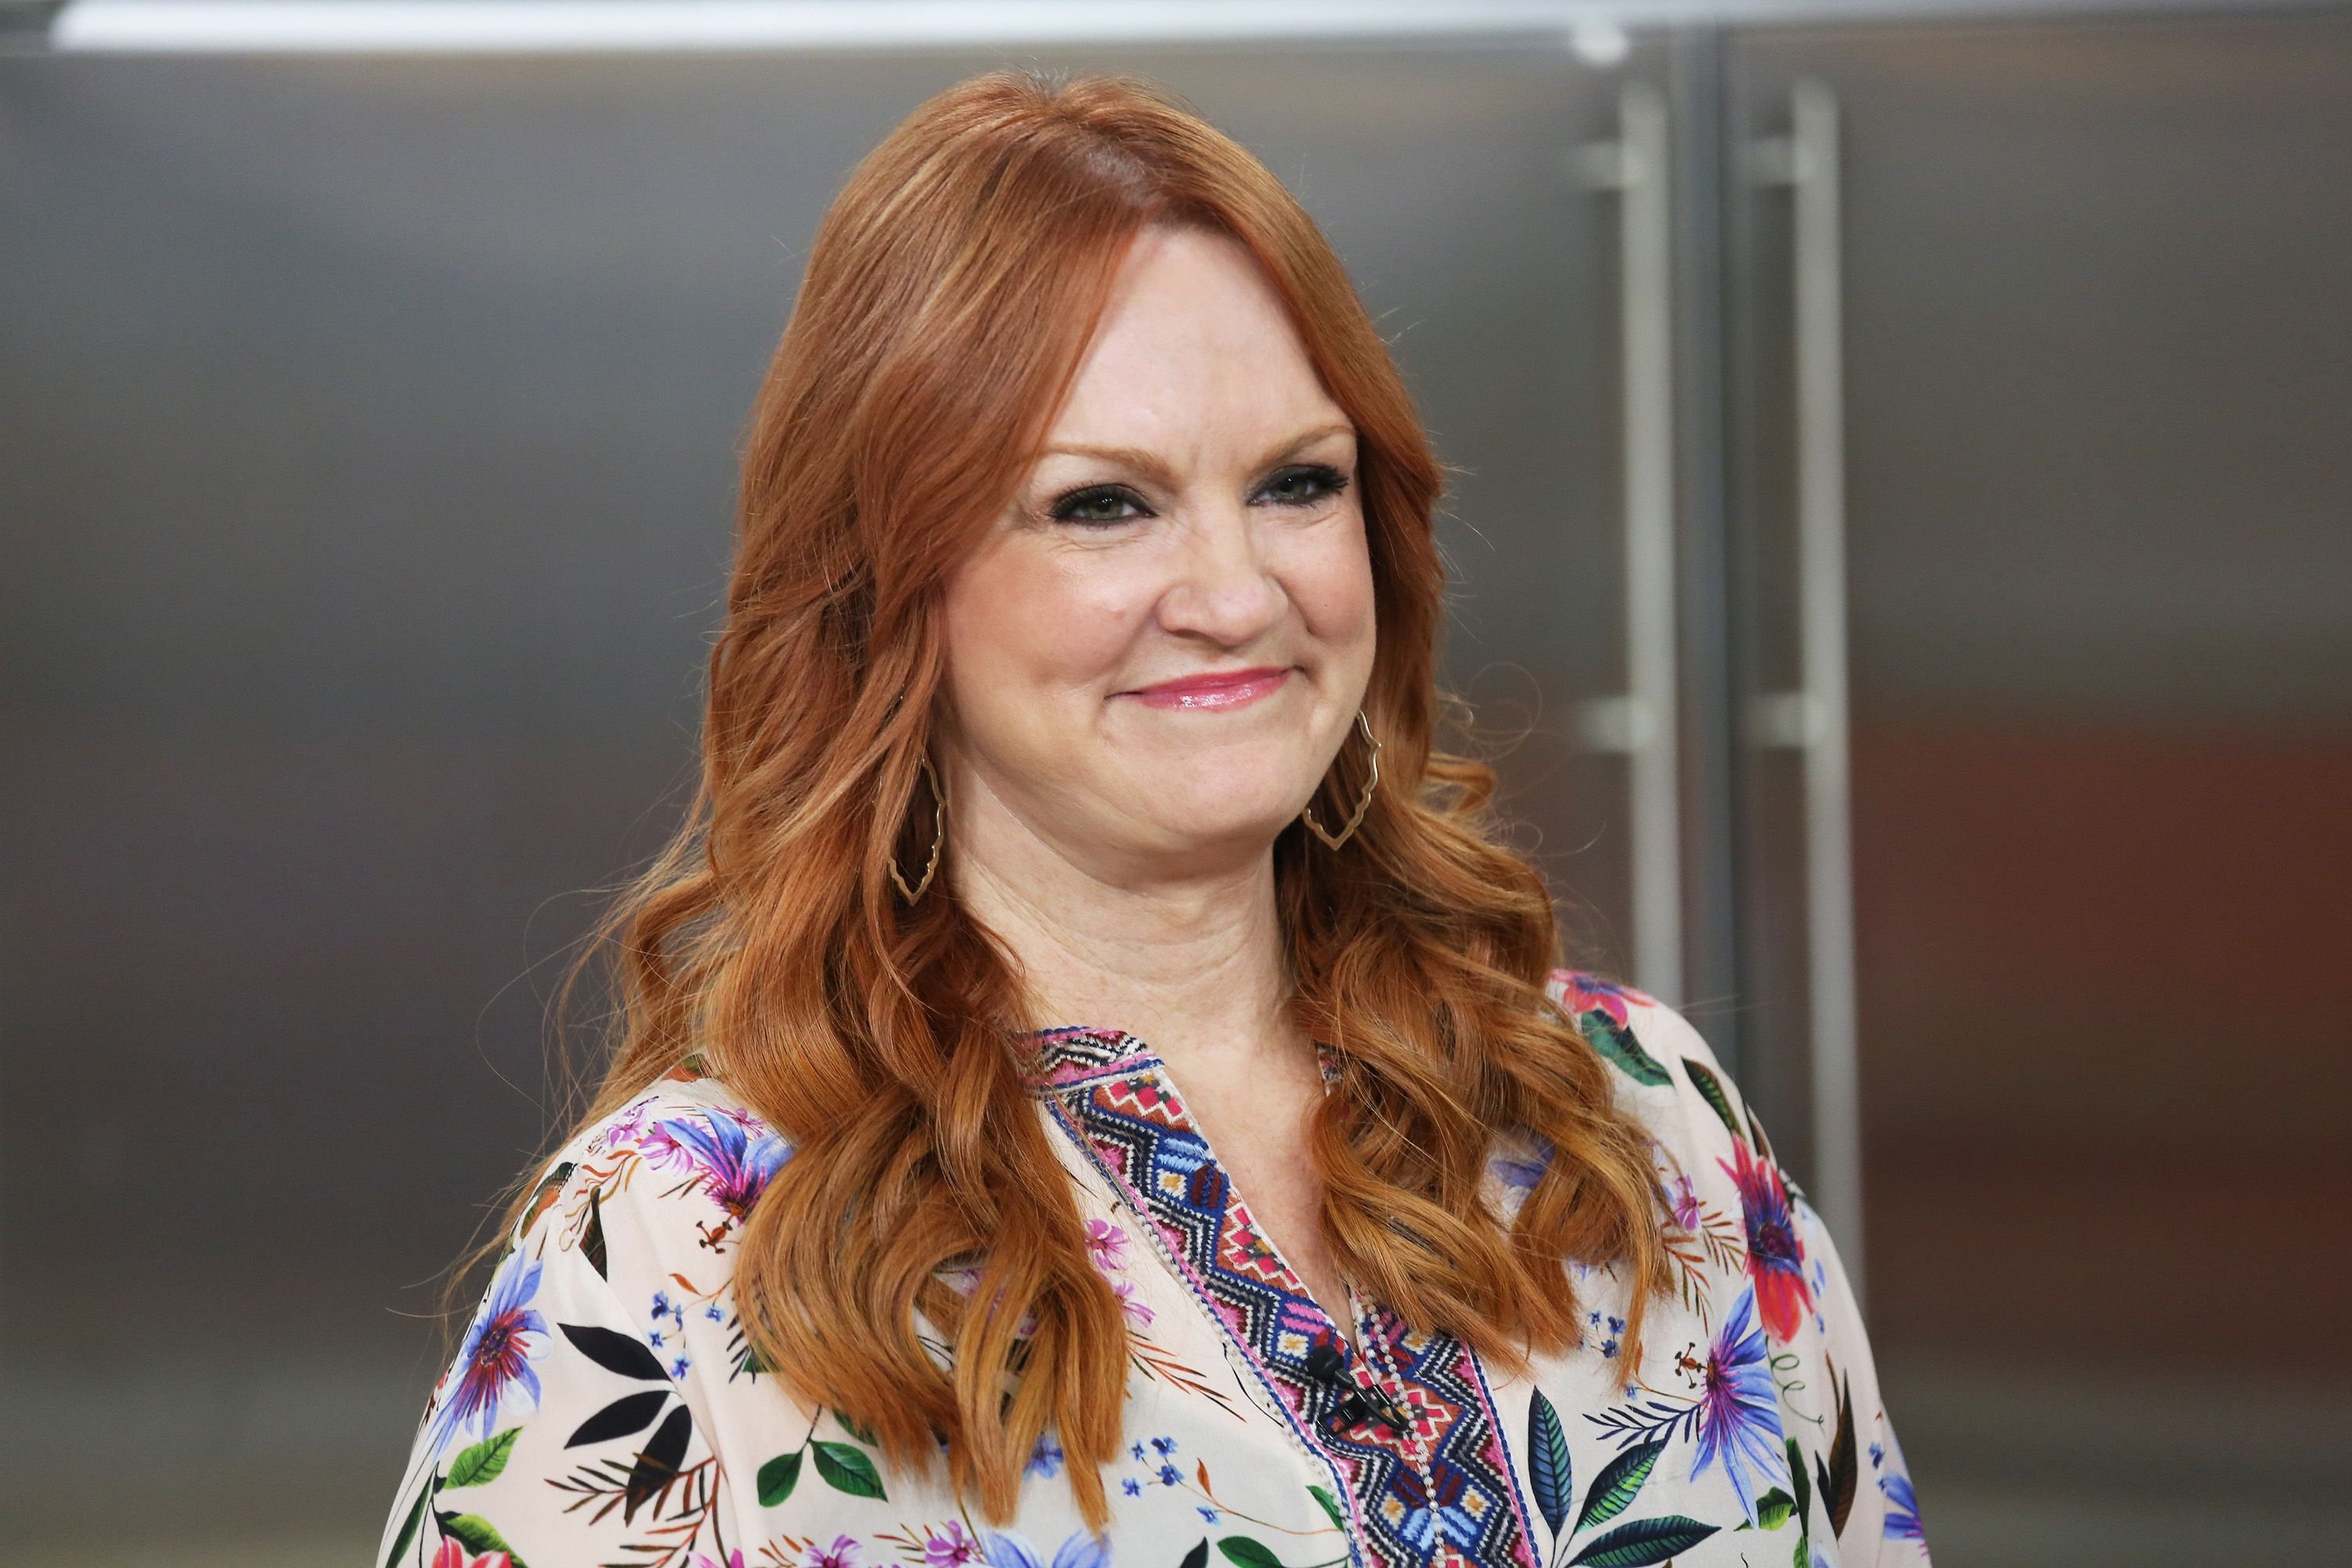 Ree Drummond at Today - Season 68 on Tuesday October 22, 2019 | Photo: Getty Images